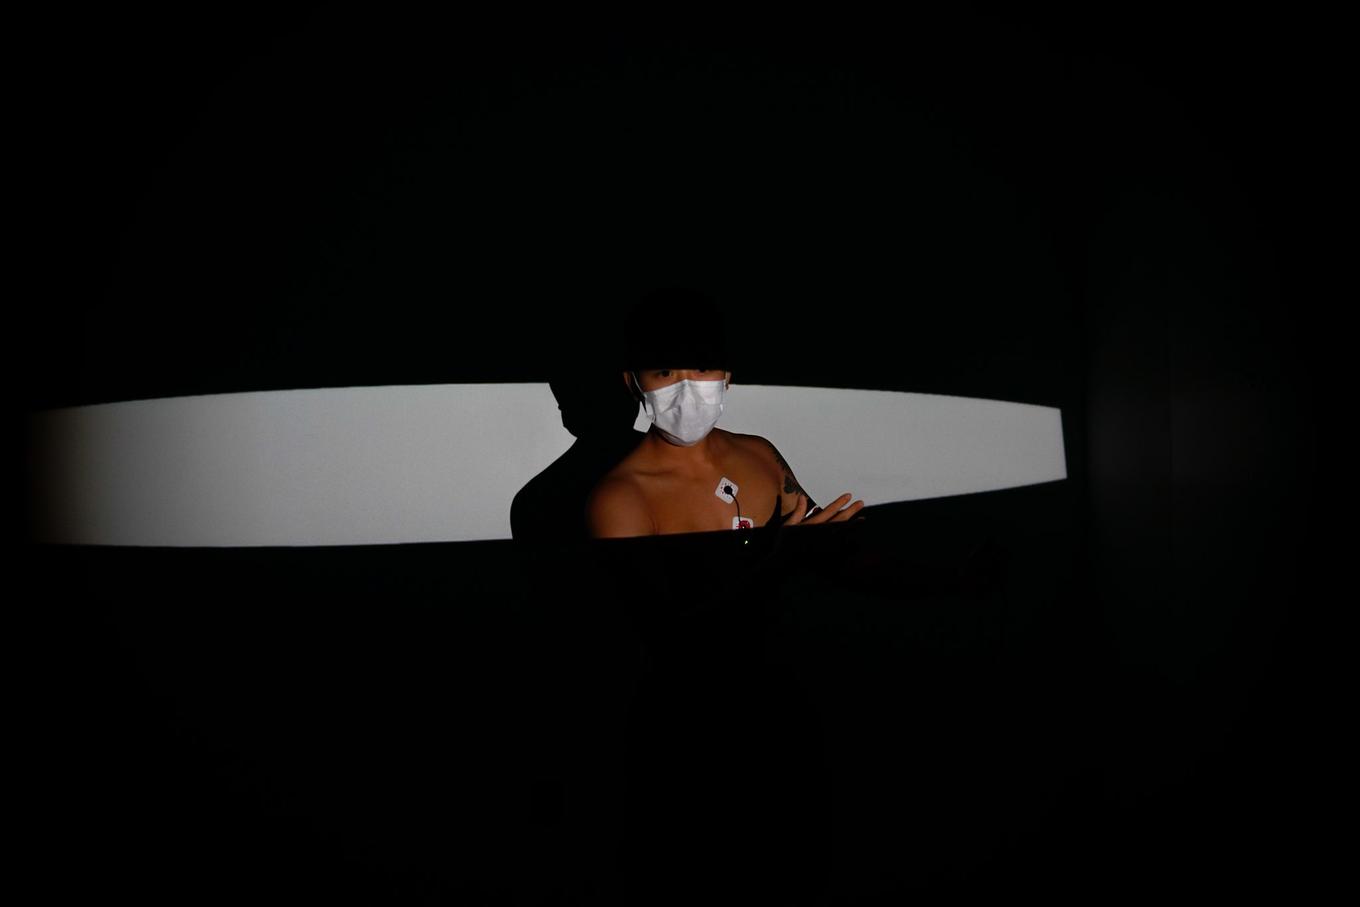 One slightly rounded slit of light, horizontal across the frame, carves space out of the darkness. In the center of it is revealed the upper torso and lower face (masked) of a person (Spencer).